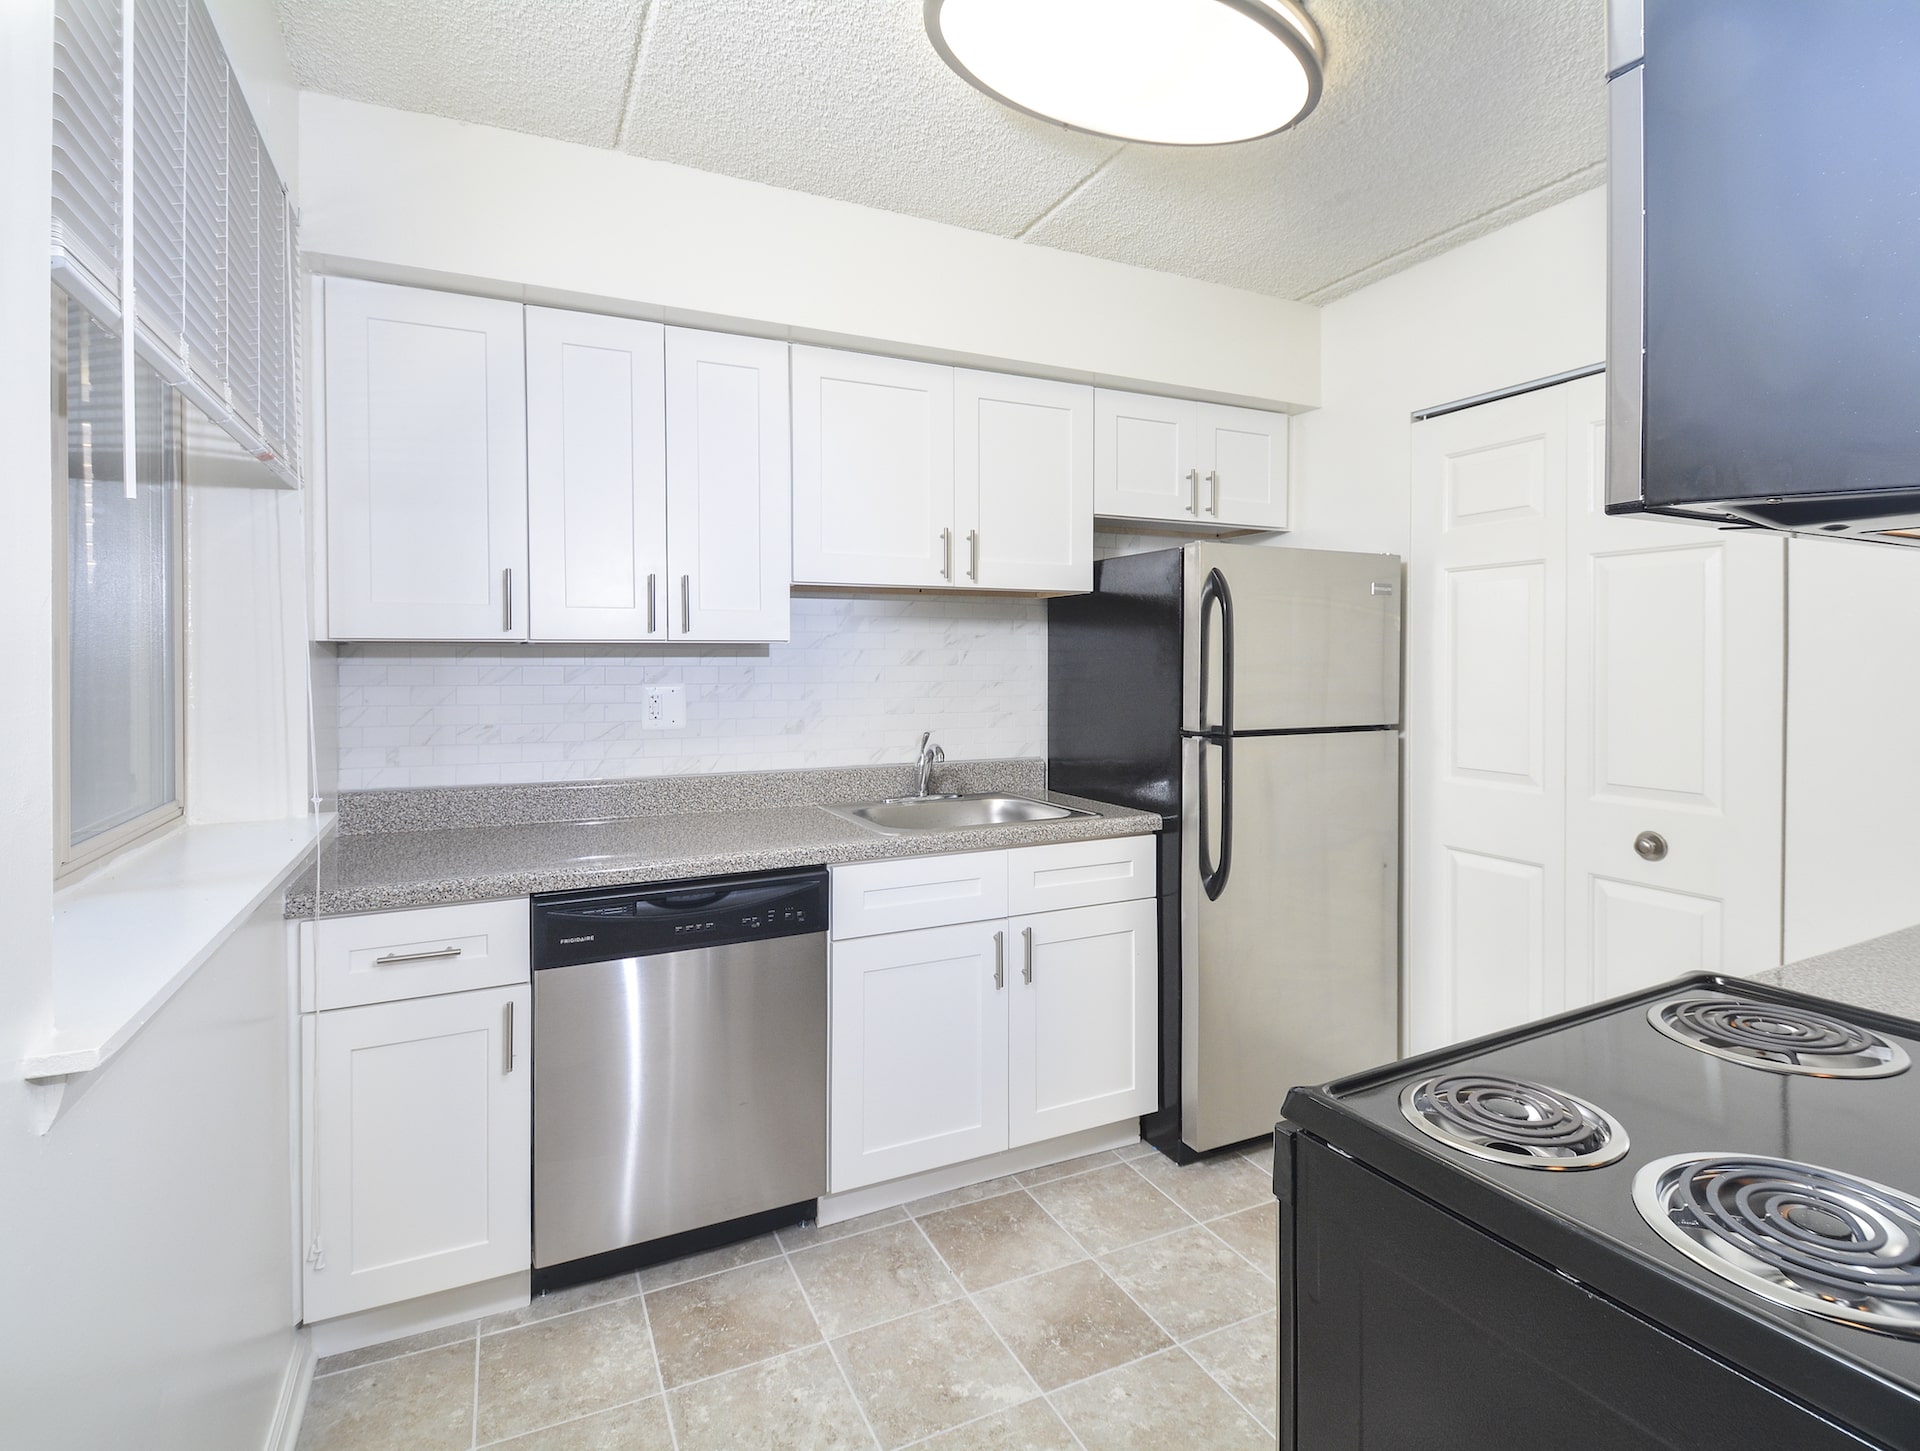 Kitchen area of an apartment, fitted with stainless steel appliances, tiled flooring, and spacious cabinets